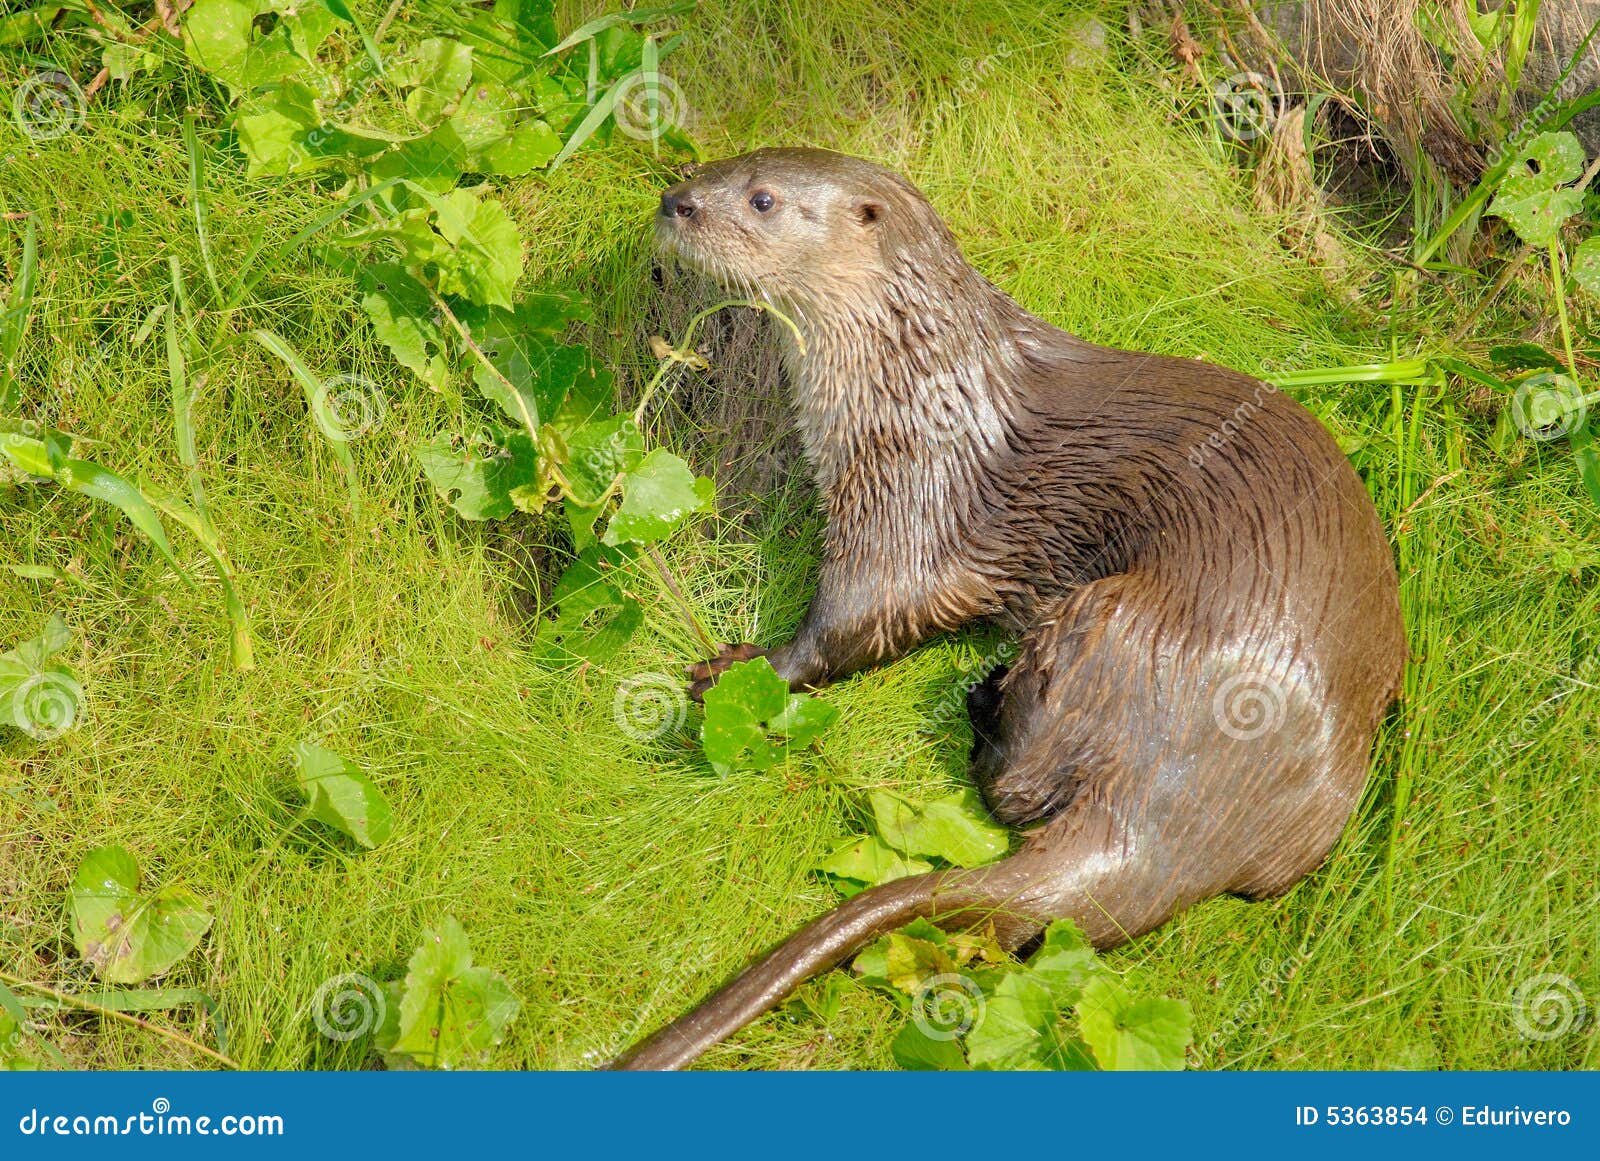 neotropical river otter